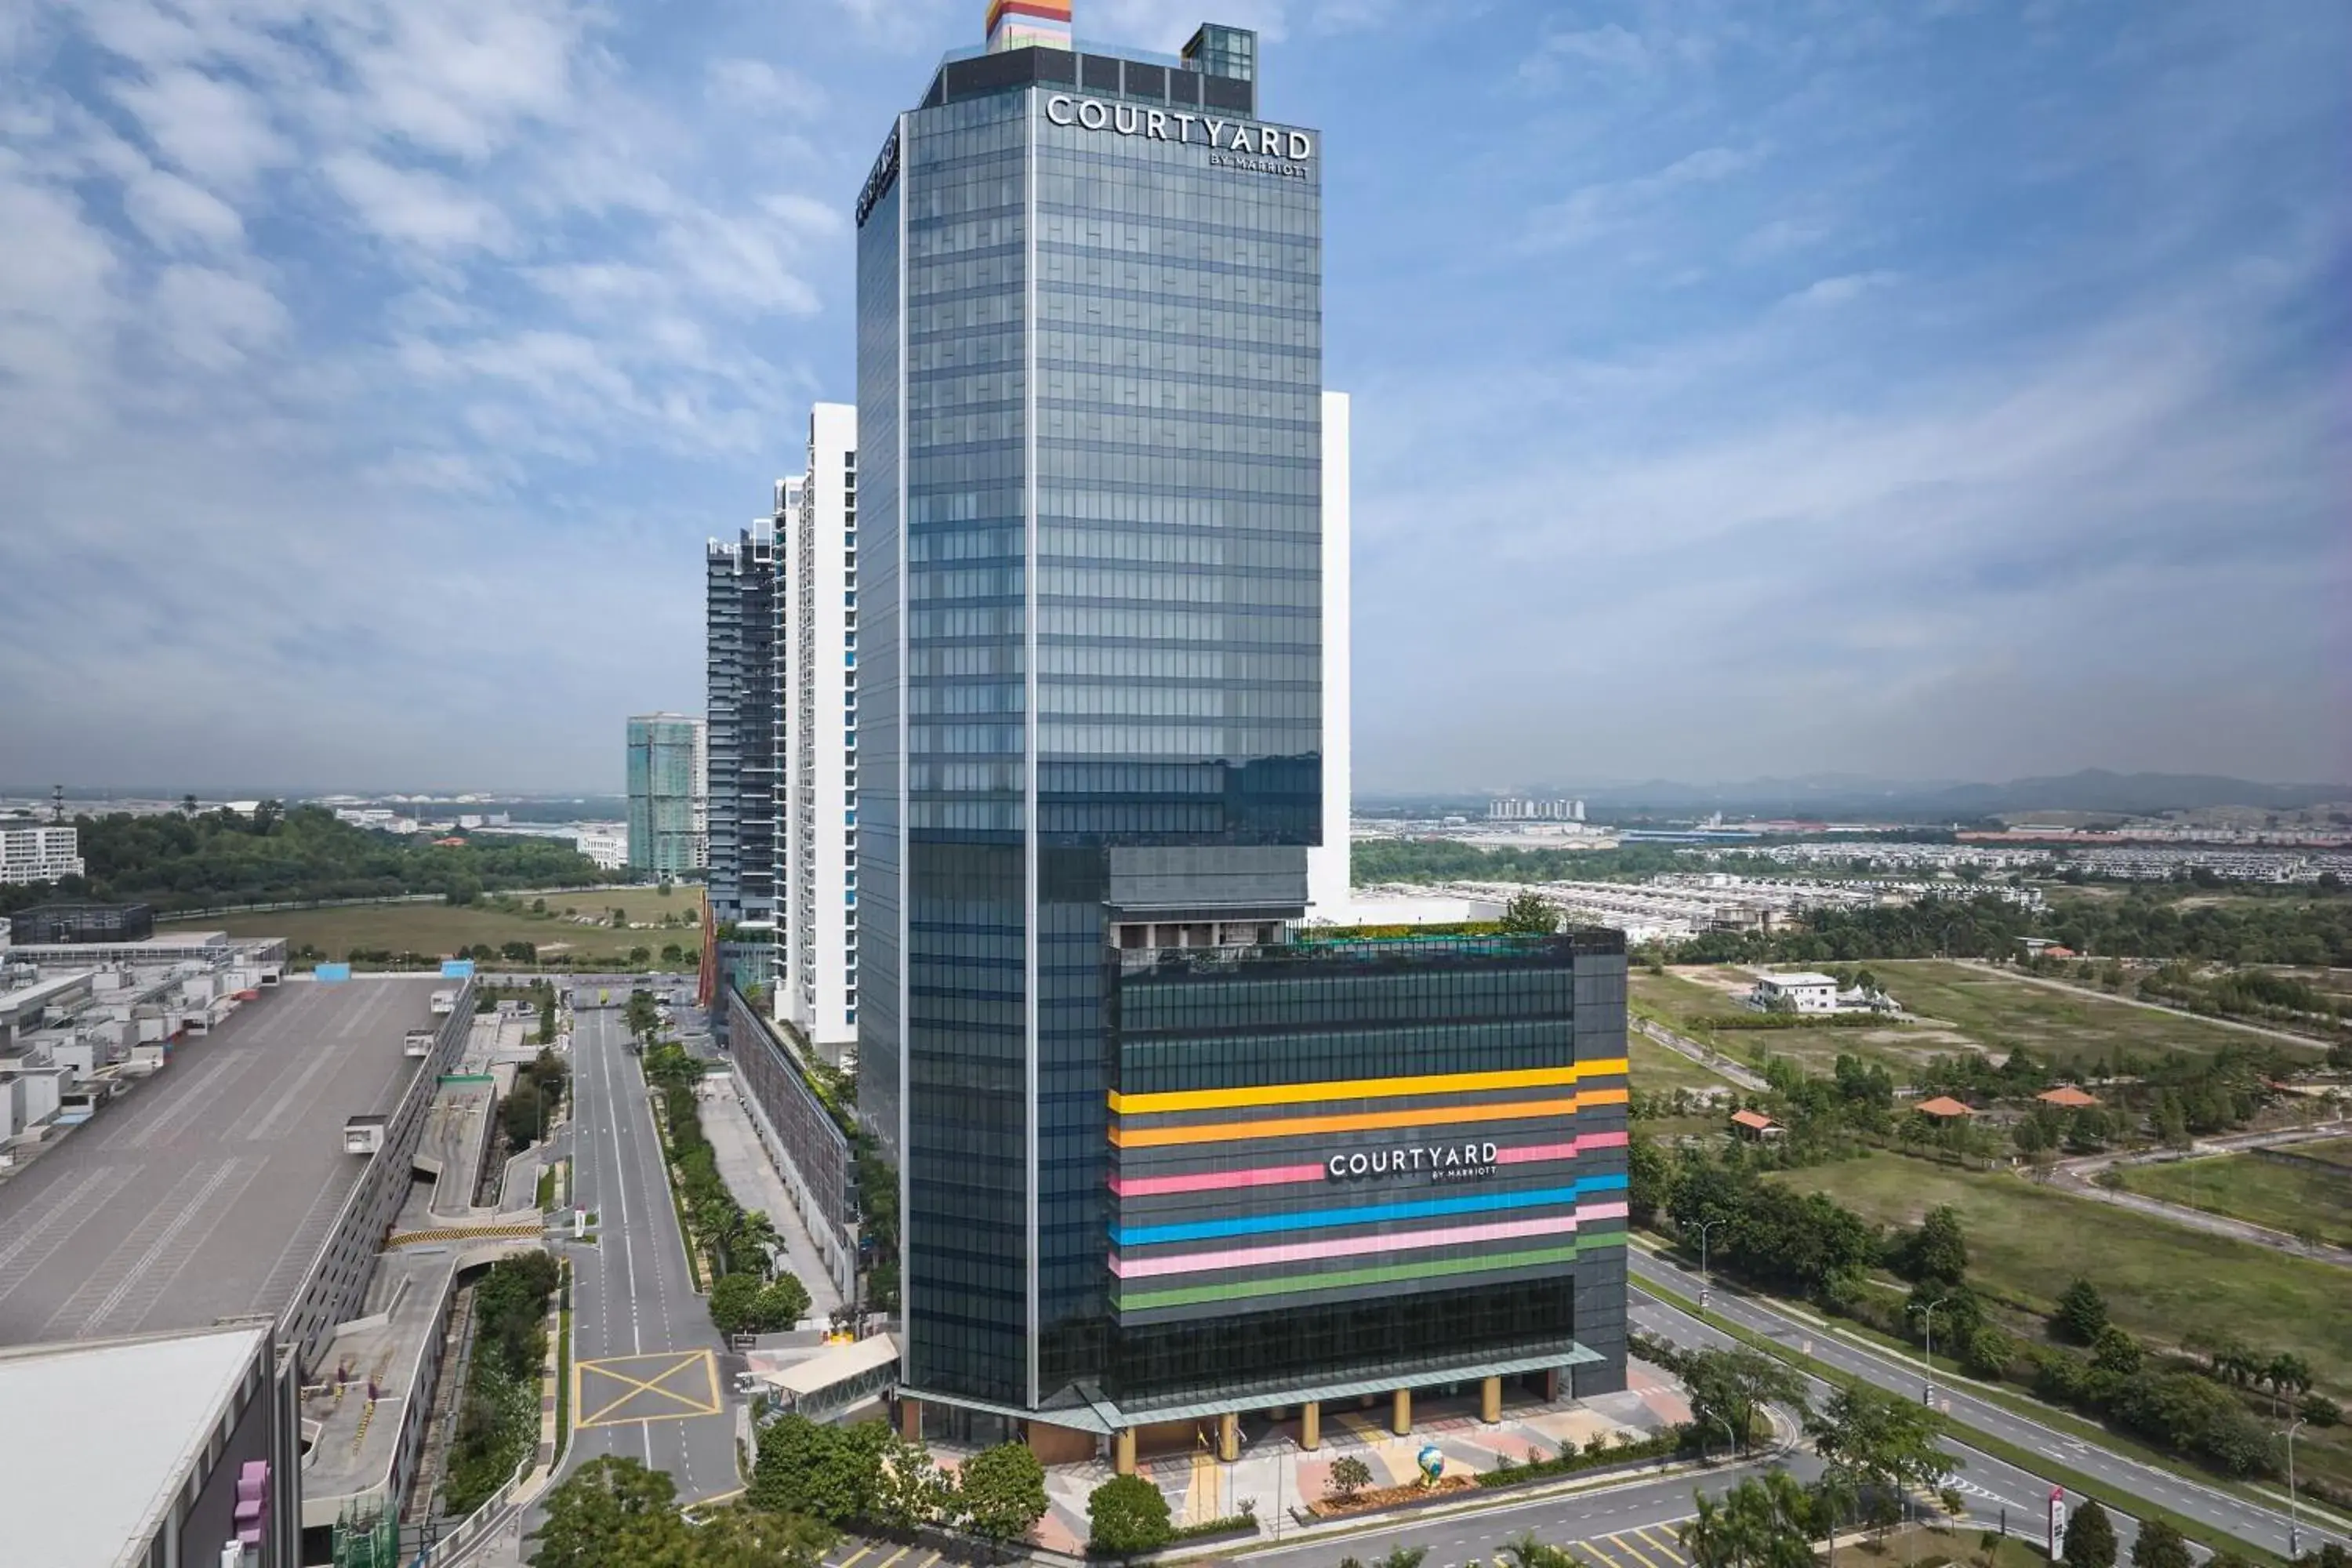 Property building in Courtyard by Marriott Setia Alam